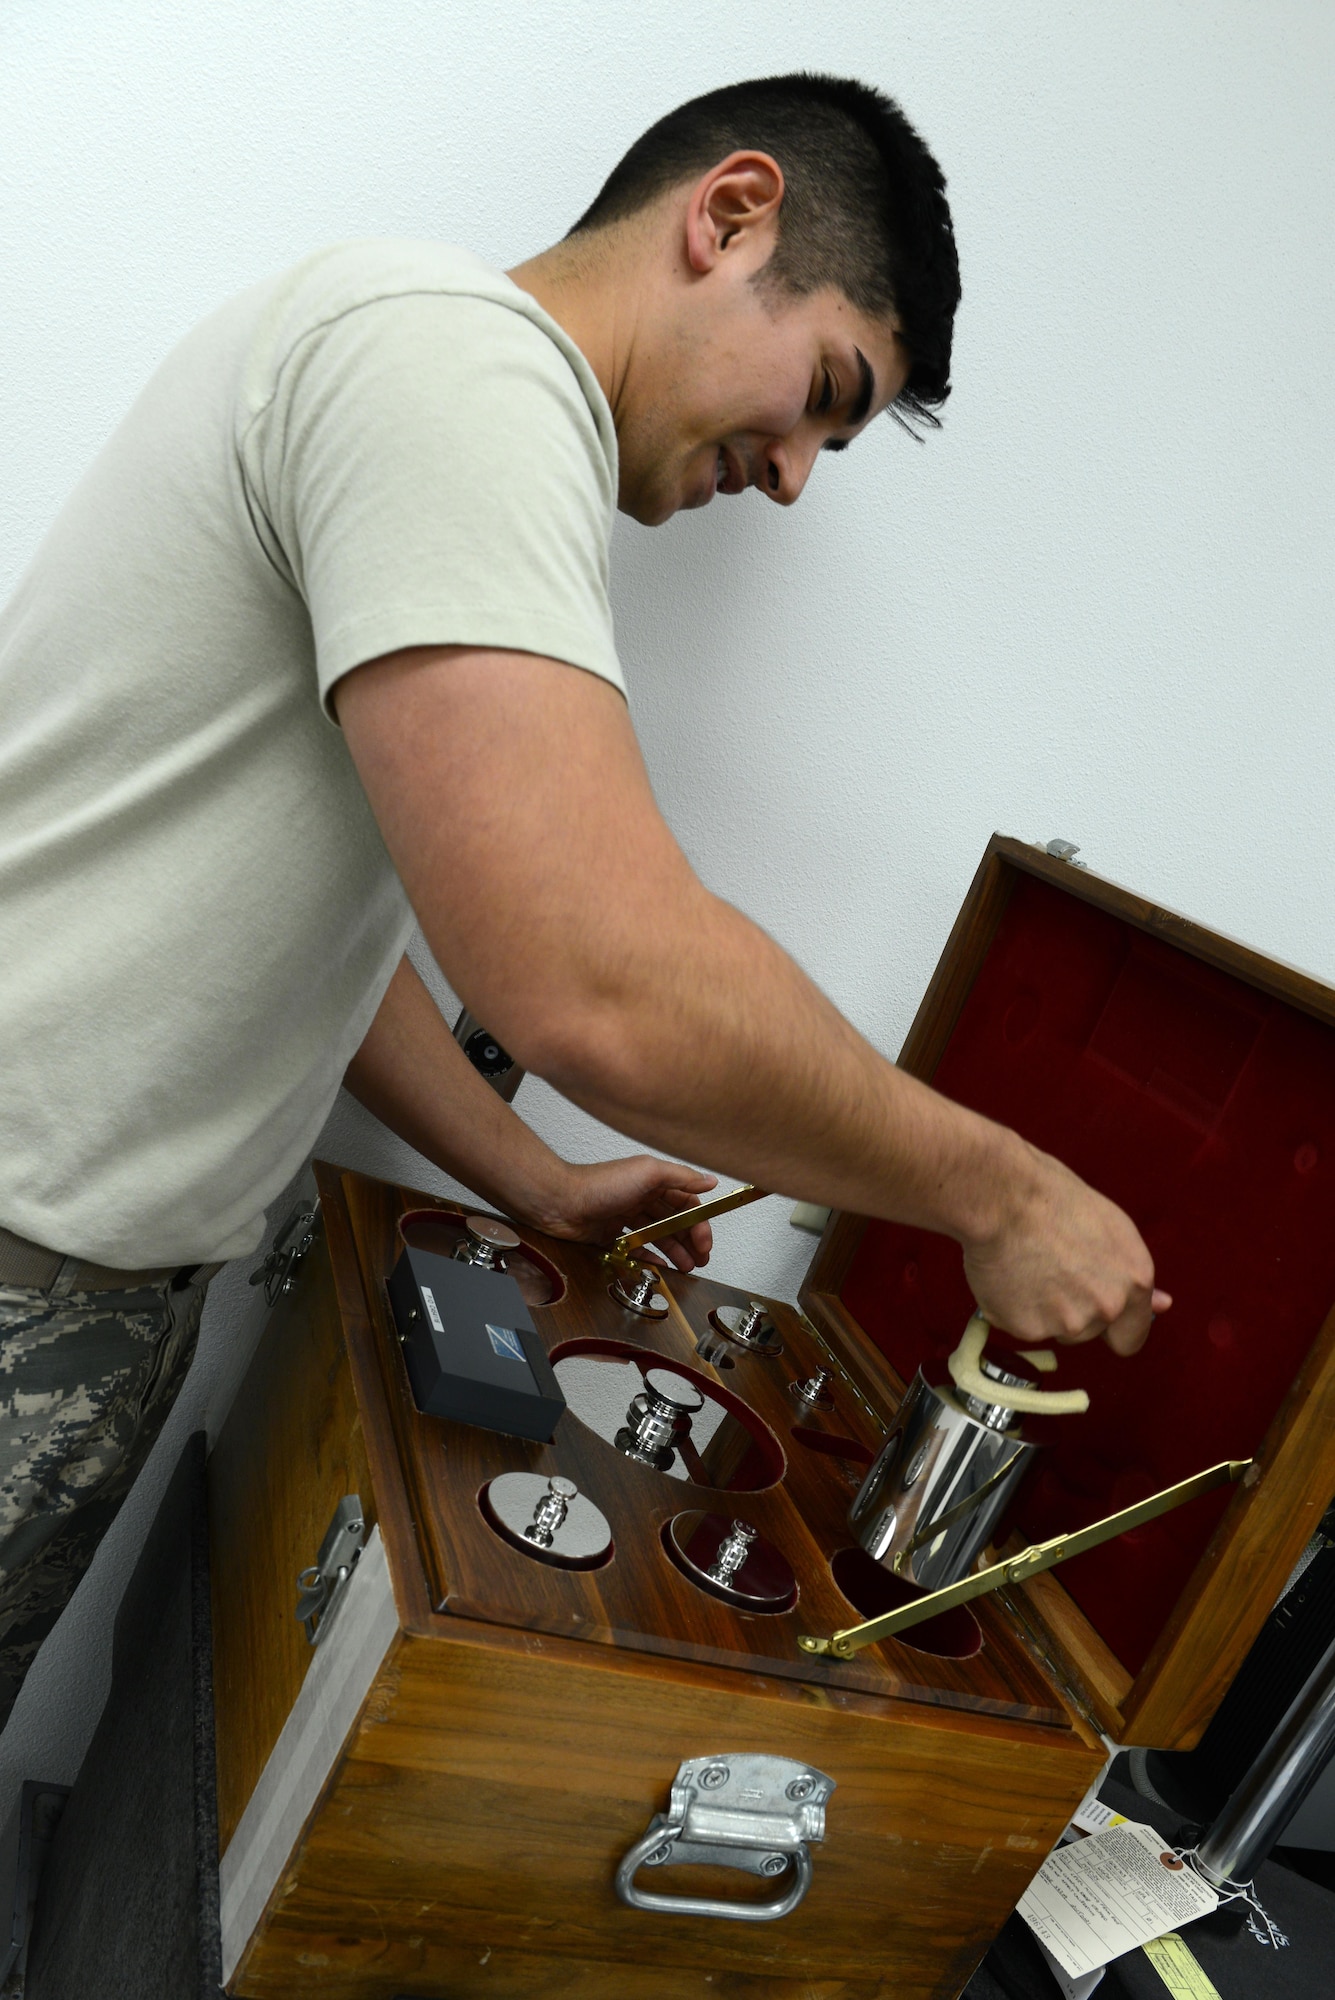 Senior Airman Donald Area, 56th Component Maintenance Squadron precision measurement equipment laboratory technician, lifts class 1 weights with prongs for a simulated weight measurement Jan. 24, 2017, at Luke Air Force Base, Ariz. The high accuracy weights are used to calibrate high accuracy scales.(U.S. Air Force photo by Airman 1st Class Pedro Mota)